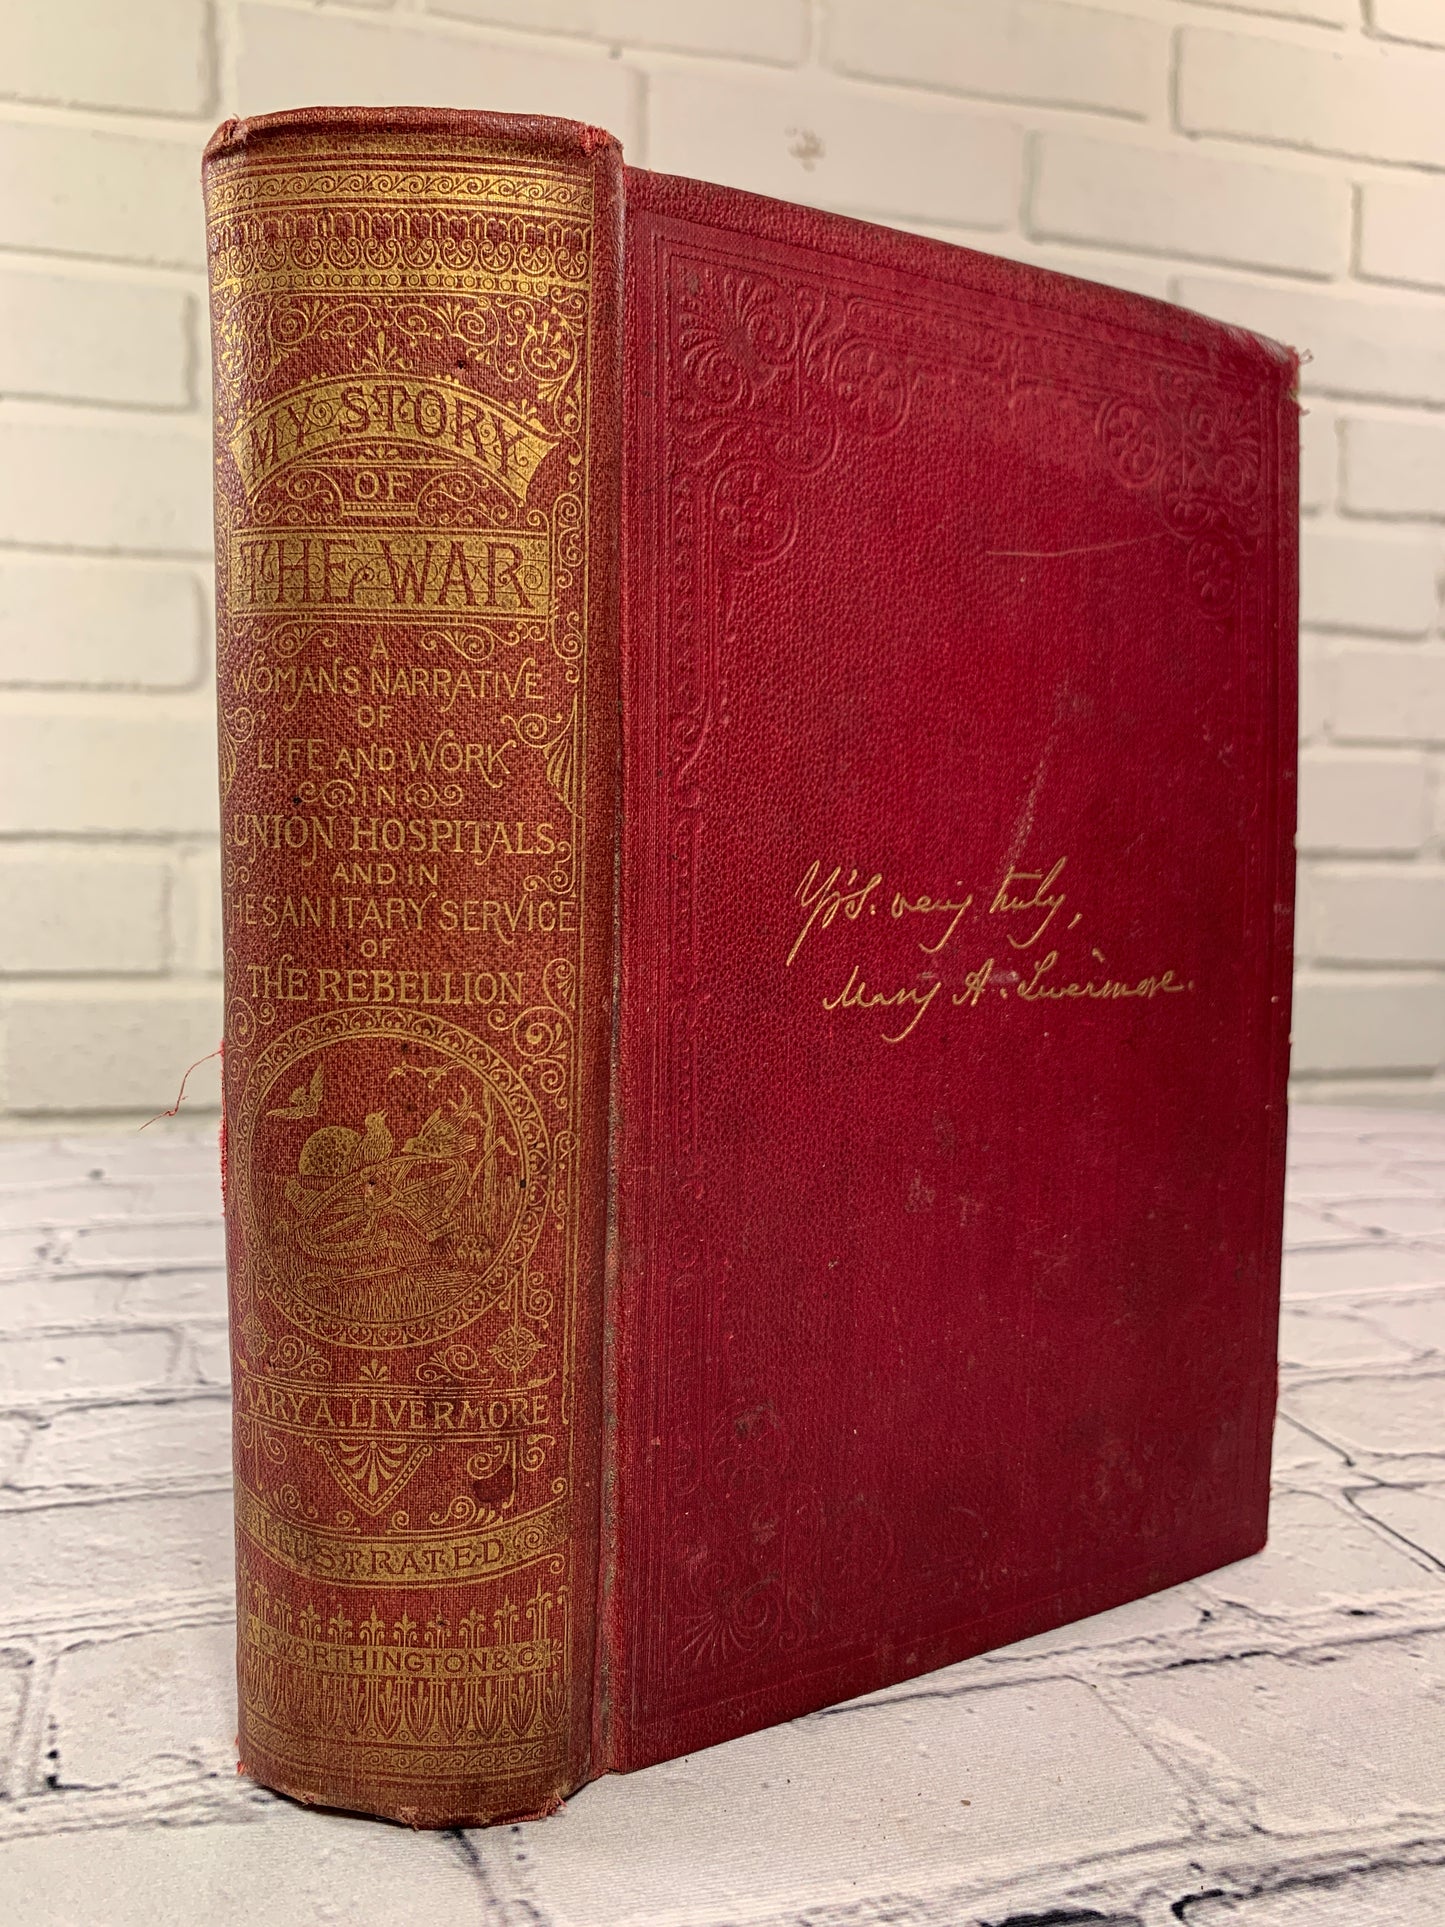 My Story of the War: A Woman's Narrative by Mary A. Livermore [1890]